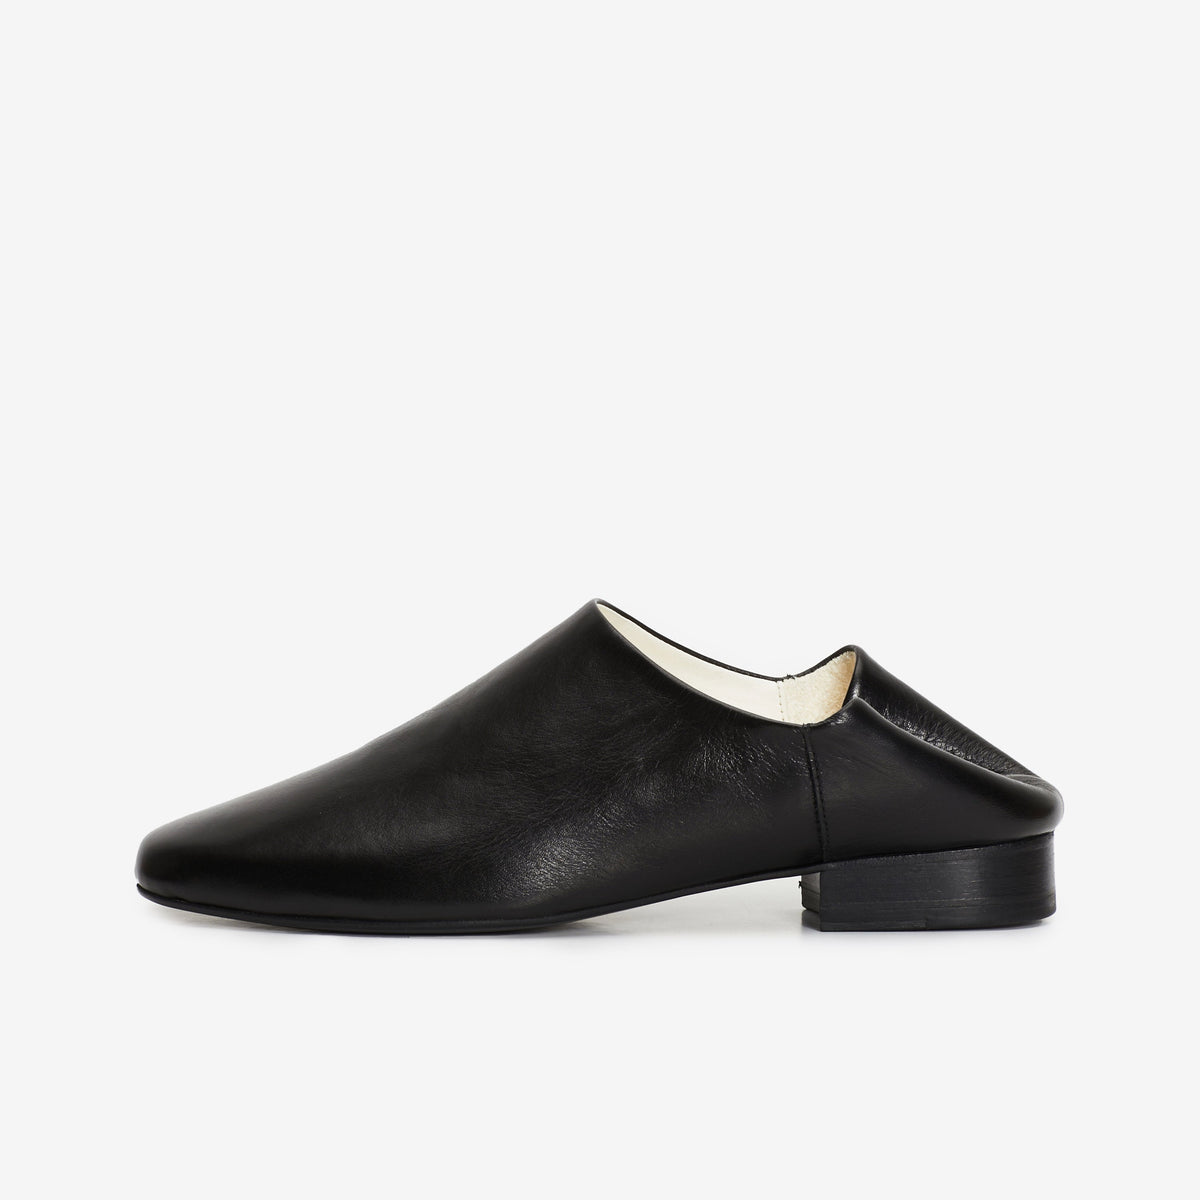 MILES BABOUCH, Black